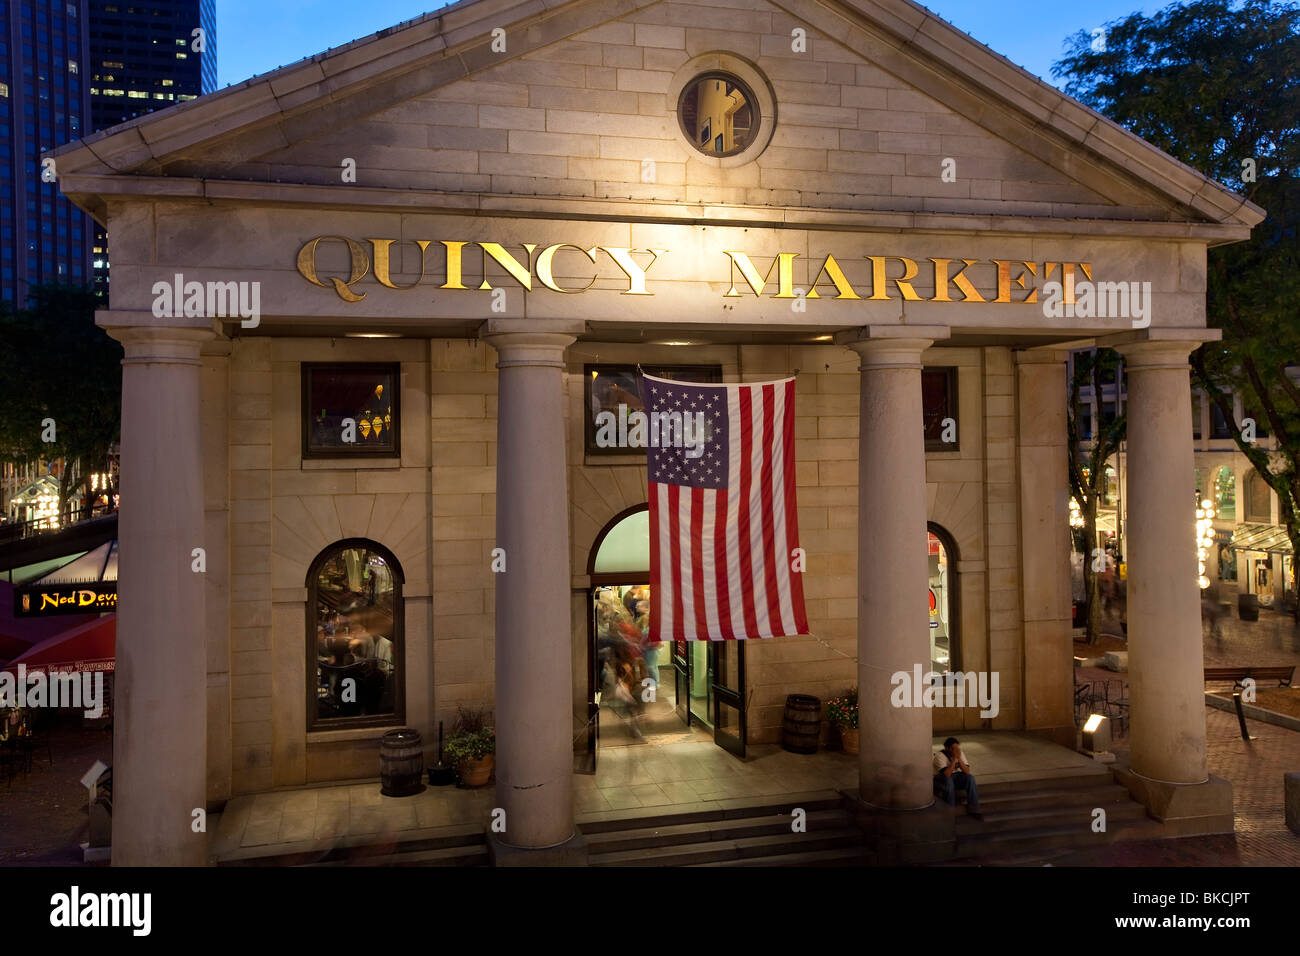 Quincy Market, Boston, Massachusetts, New England, USA Banque D'Images